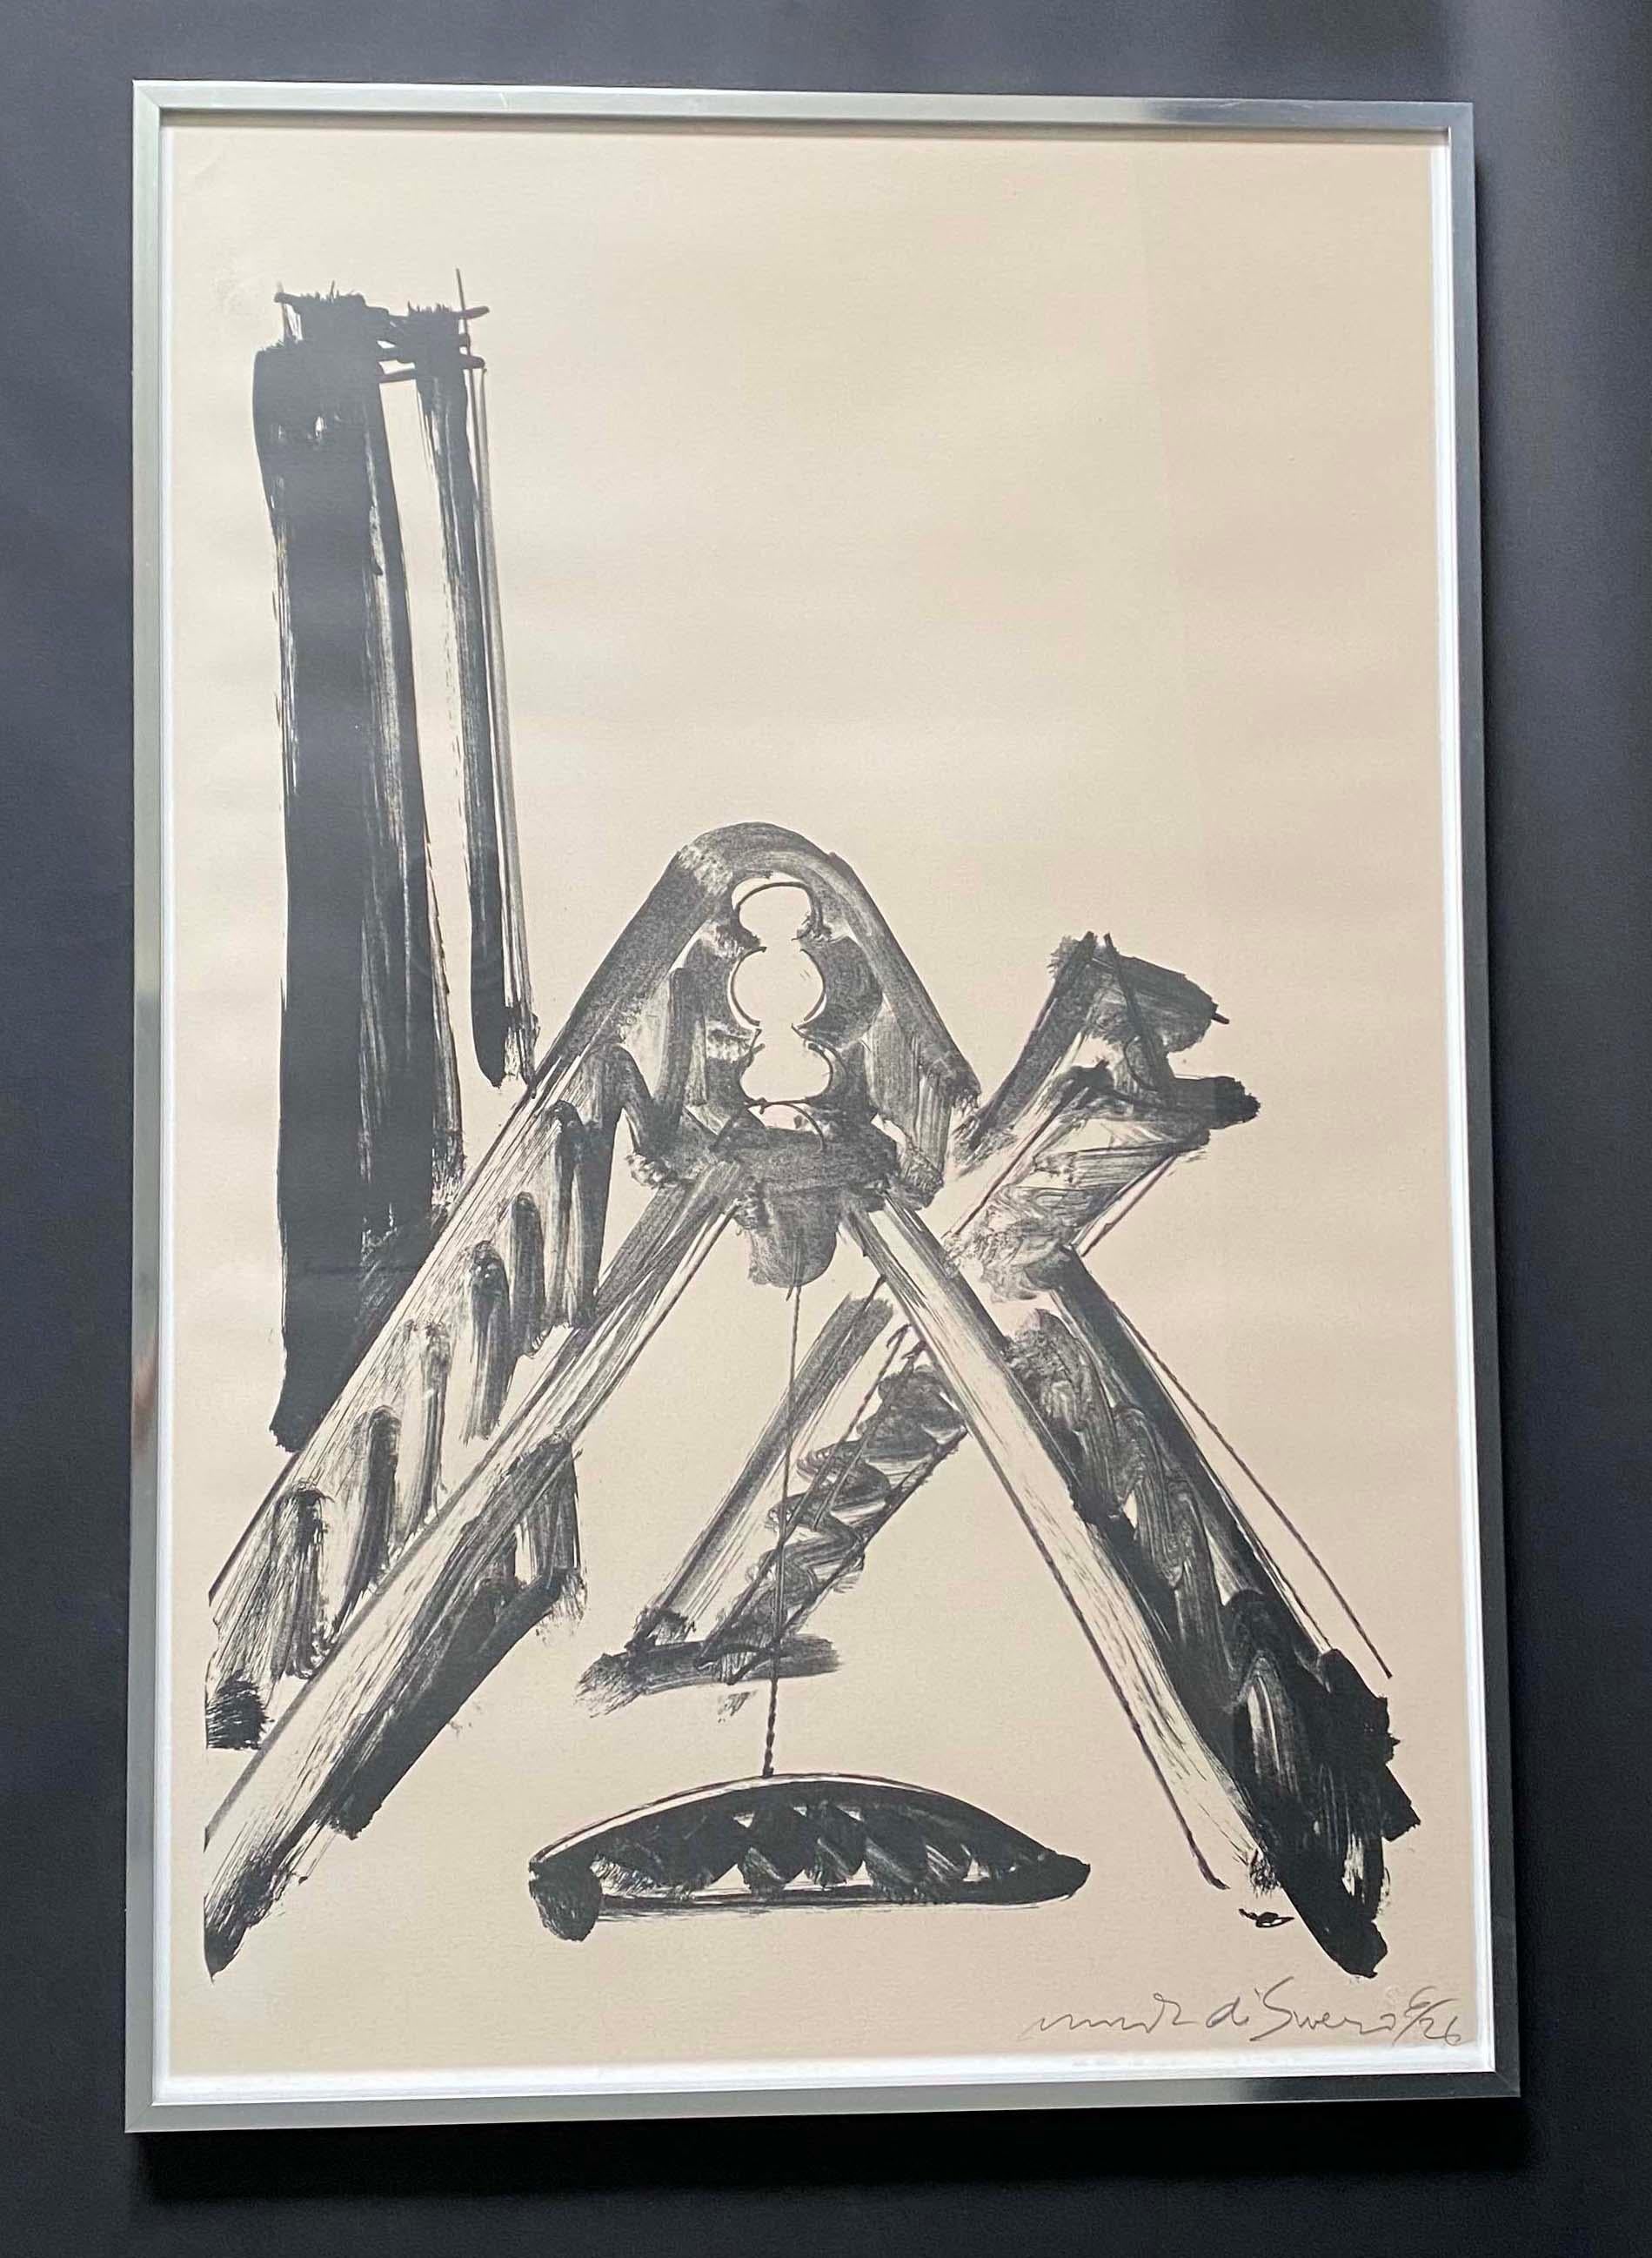 Paper Mid-Century Modern Mark Di Suvero Signed Abstract Lithograph 6/26 1970s